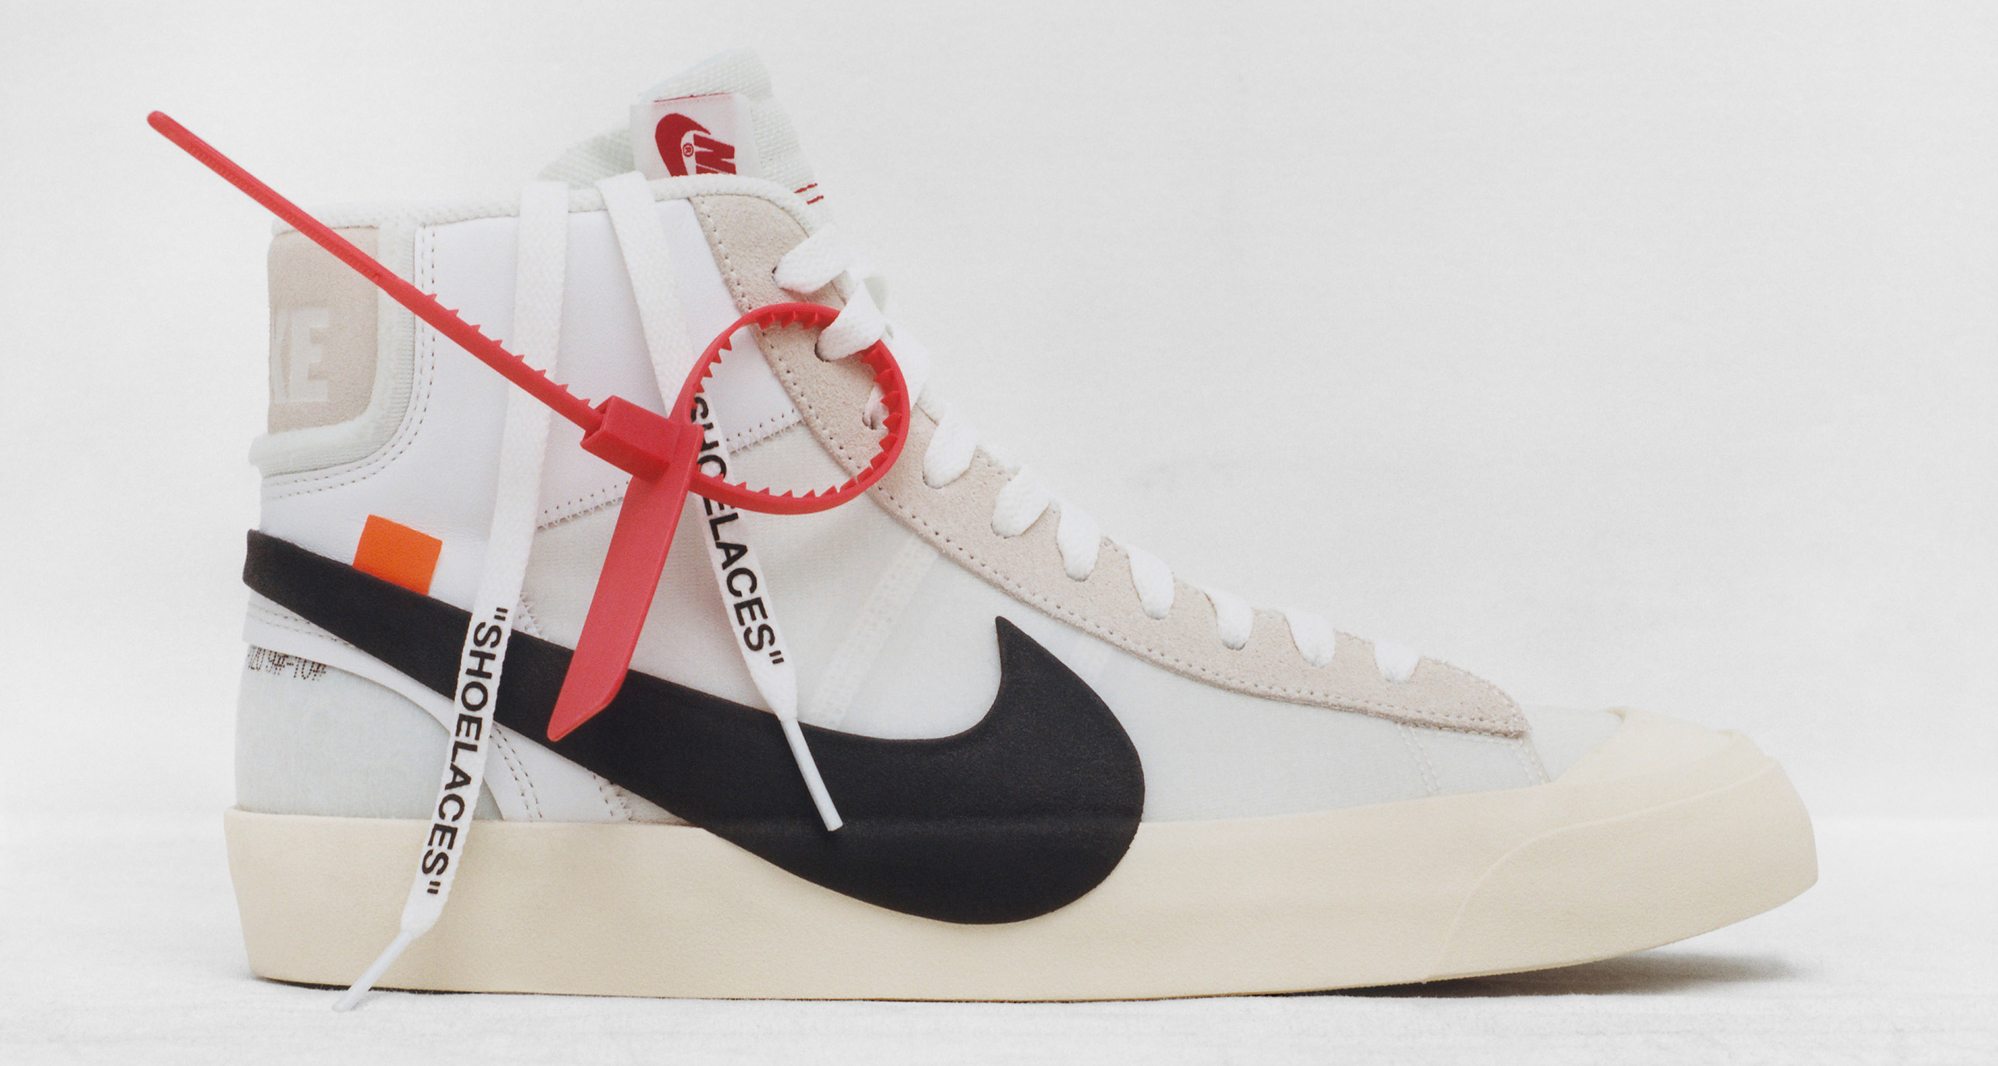 Off-White x Nike: The History Behind Virgil Abloh's Sneaker Collaborations, Sneakers, Sports Memorabilia & Modern Collectibles